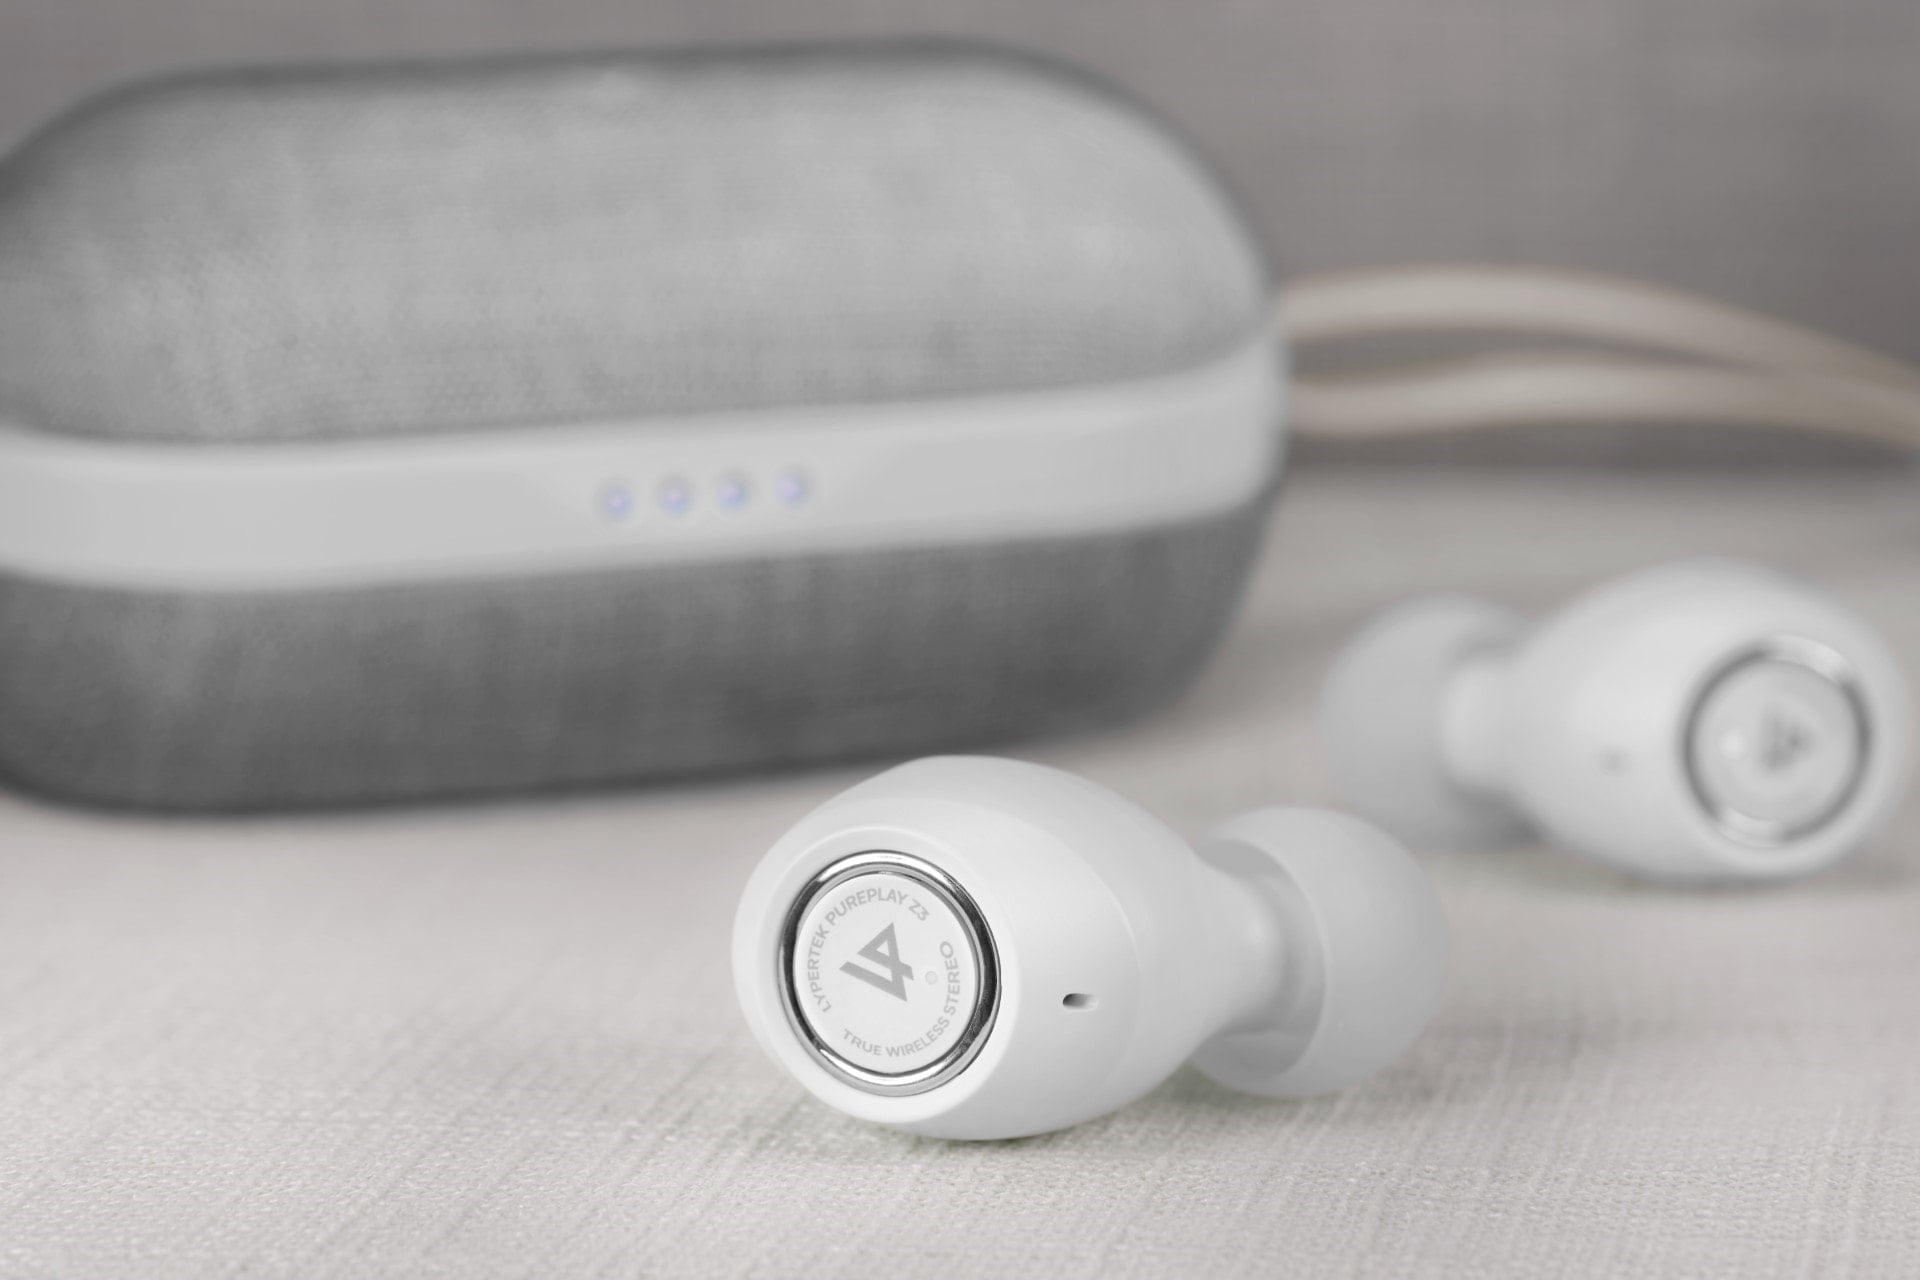 Lypertek PurePlay Z3 2.0 true wireless earphones announced for £99 with Qualcomm QCC3040 Bluetooth 5.2 chipset offering improved connectivity